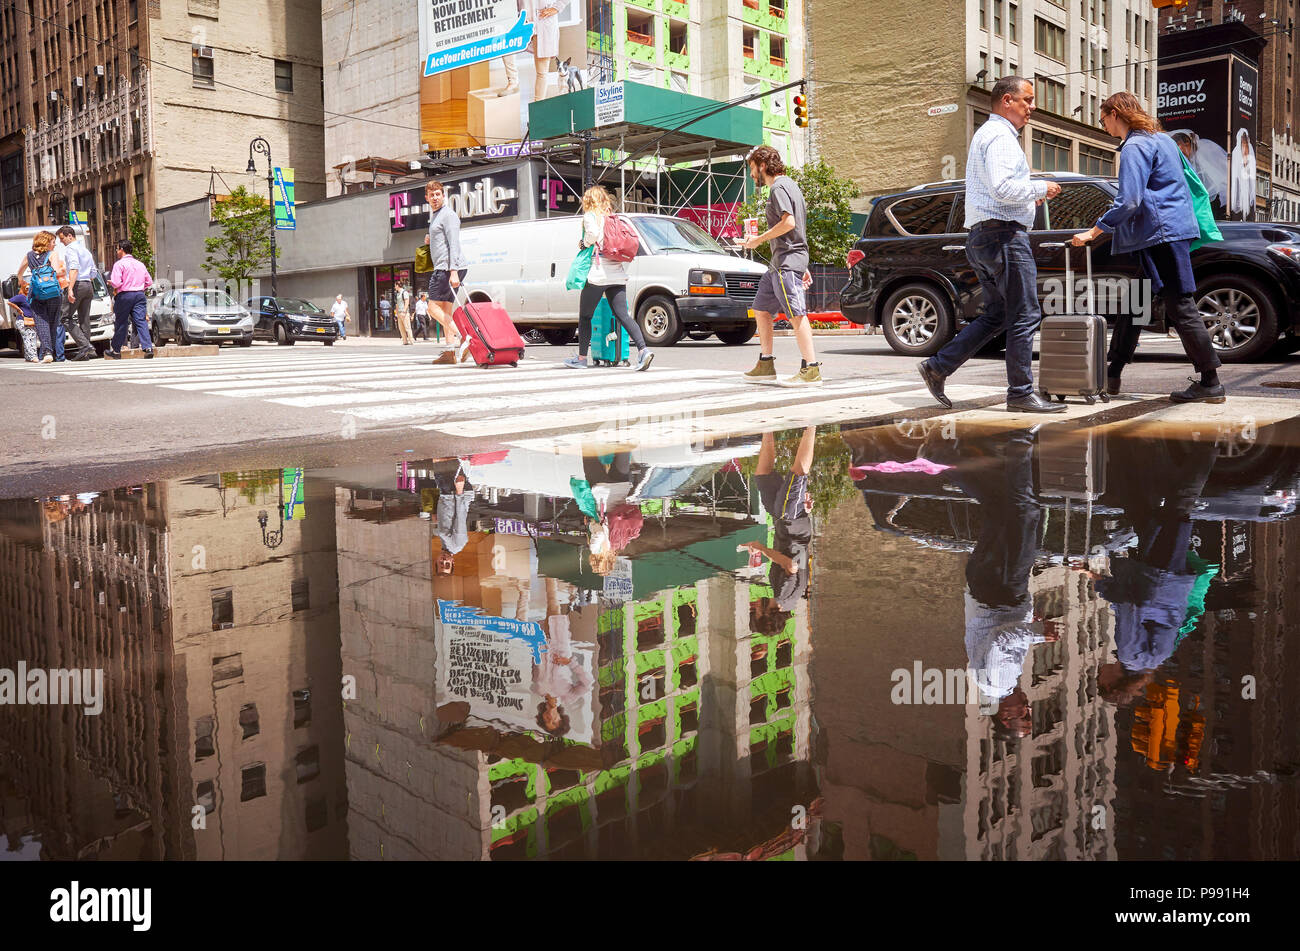 New York City, USA - June 28, 2018: People walking through pedestrian crossing reflected in a puddle in Midtown Manhattan. Stock Photo